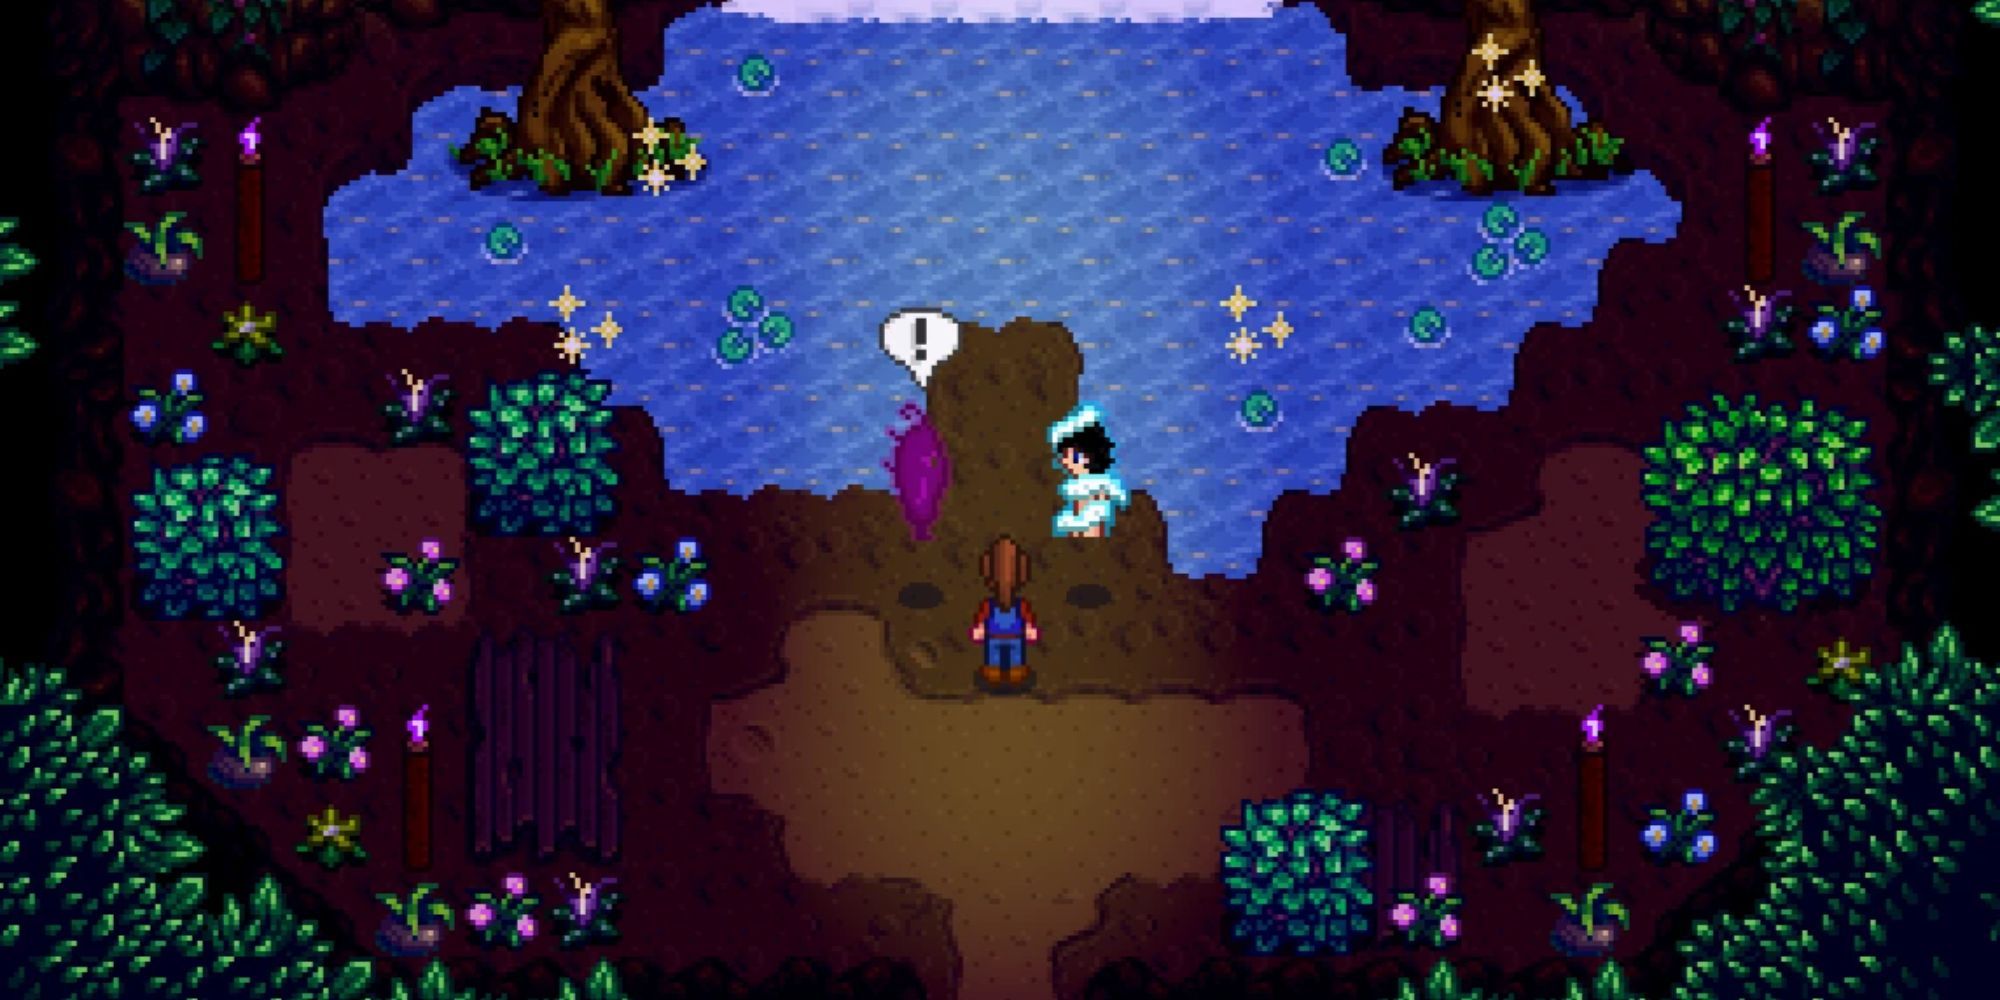 Stardew Valley mod Lunna, with the farmer peering out onto a magical lake